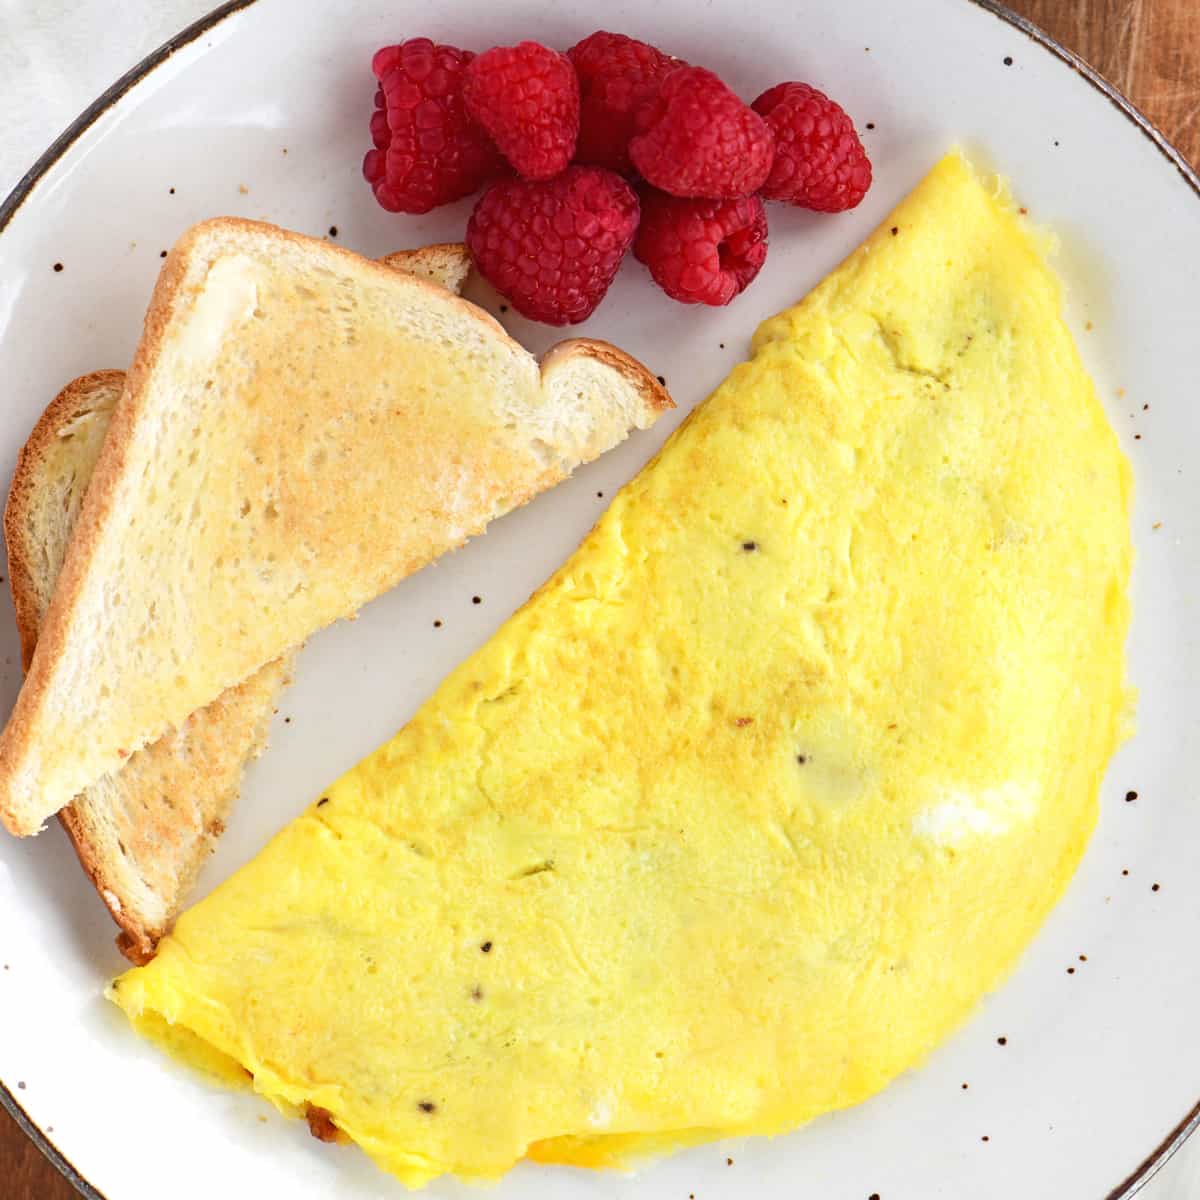 berries, an omelette and toast.